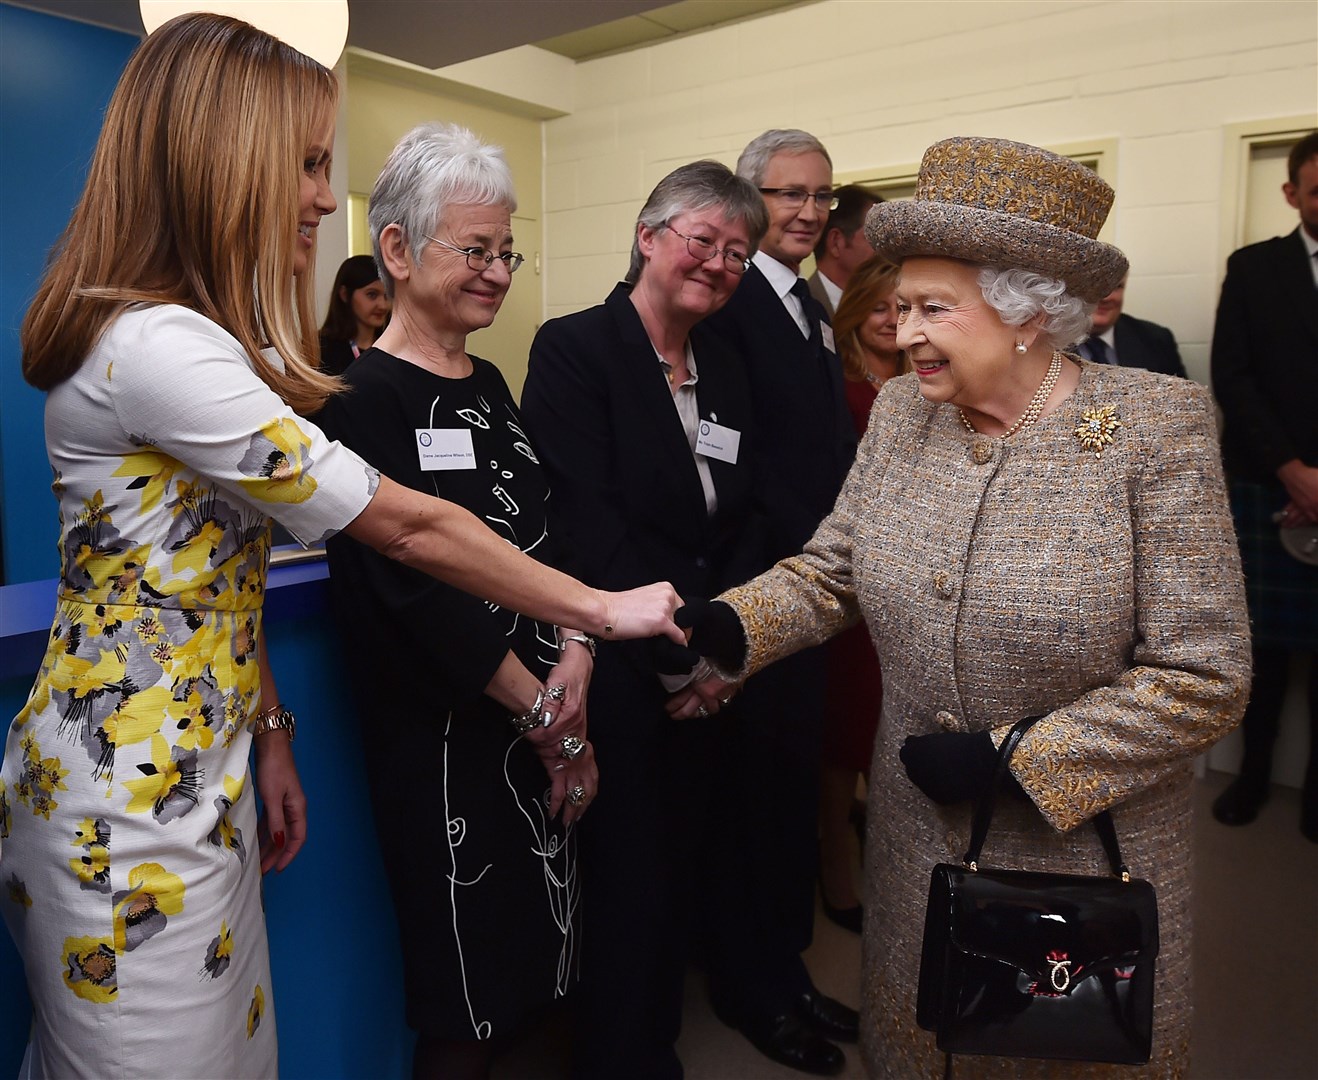 The Queen meeting Amanda Holden at the event in 2015 (Ben Stansall/PA)